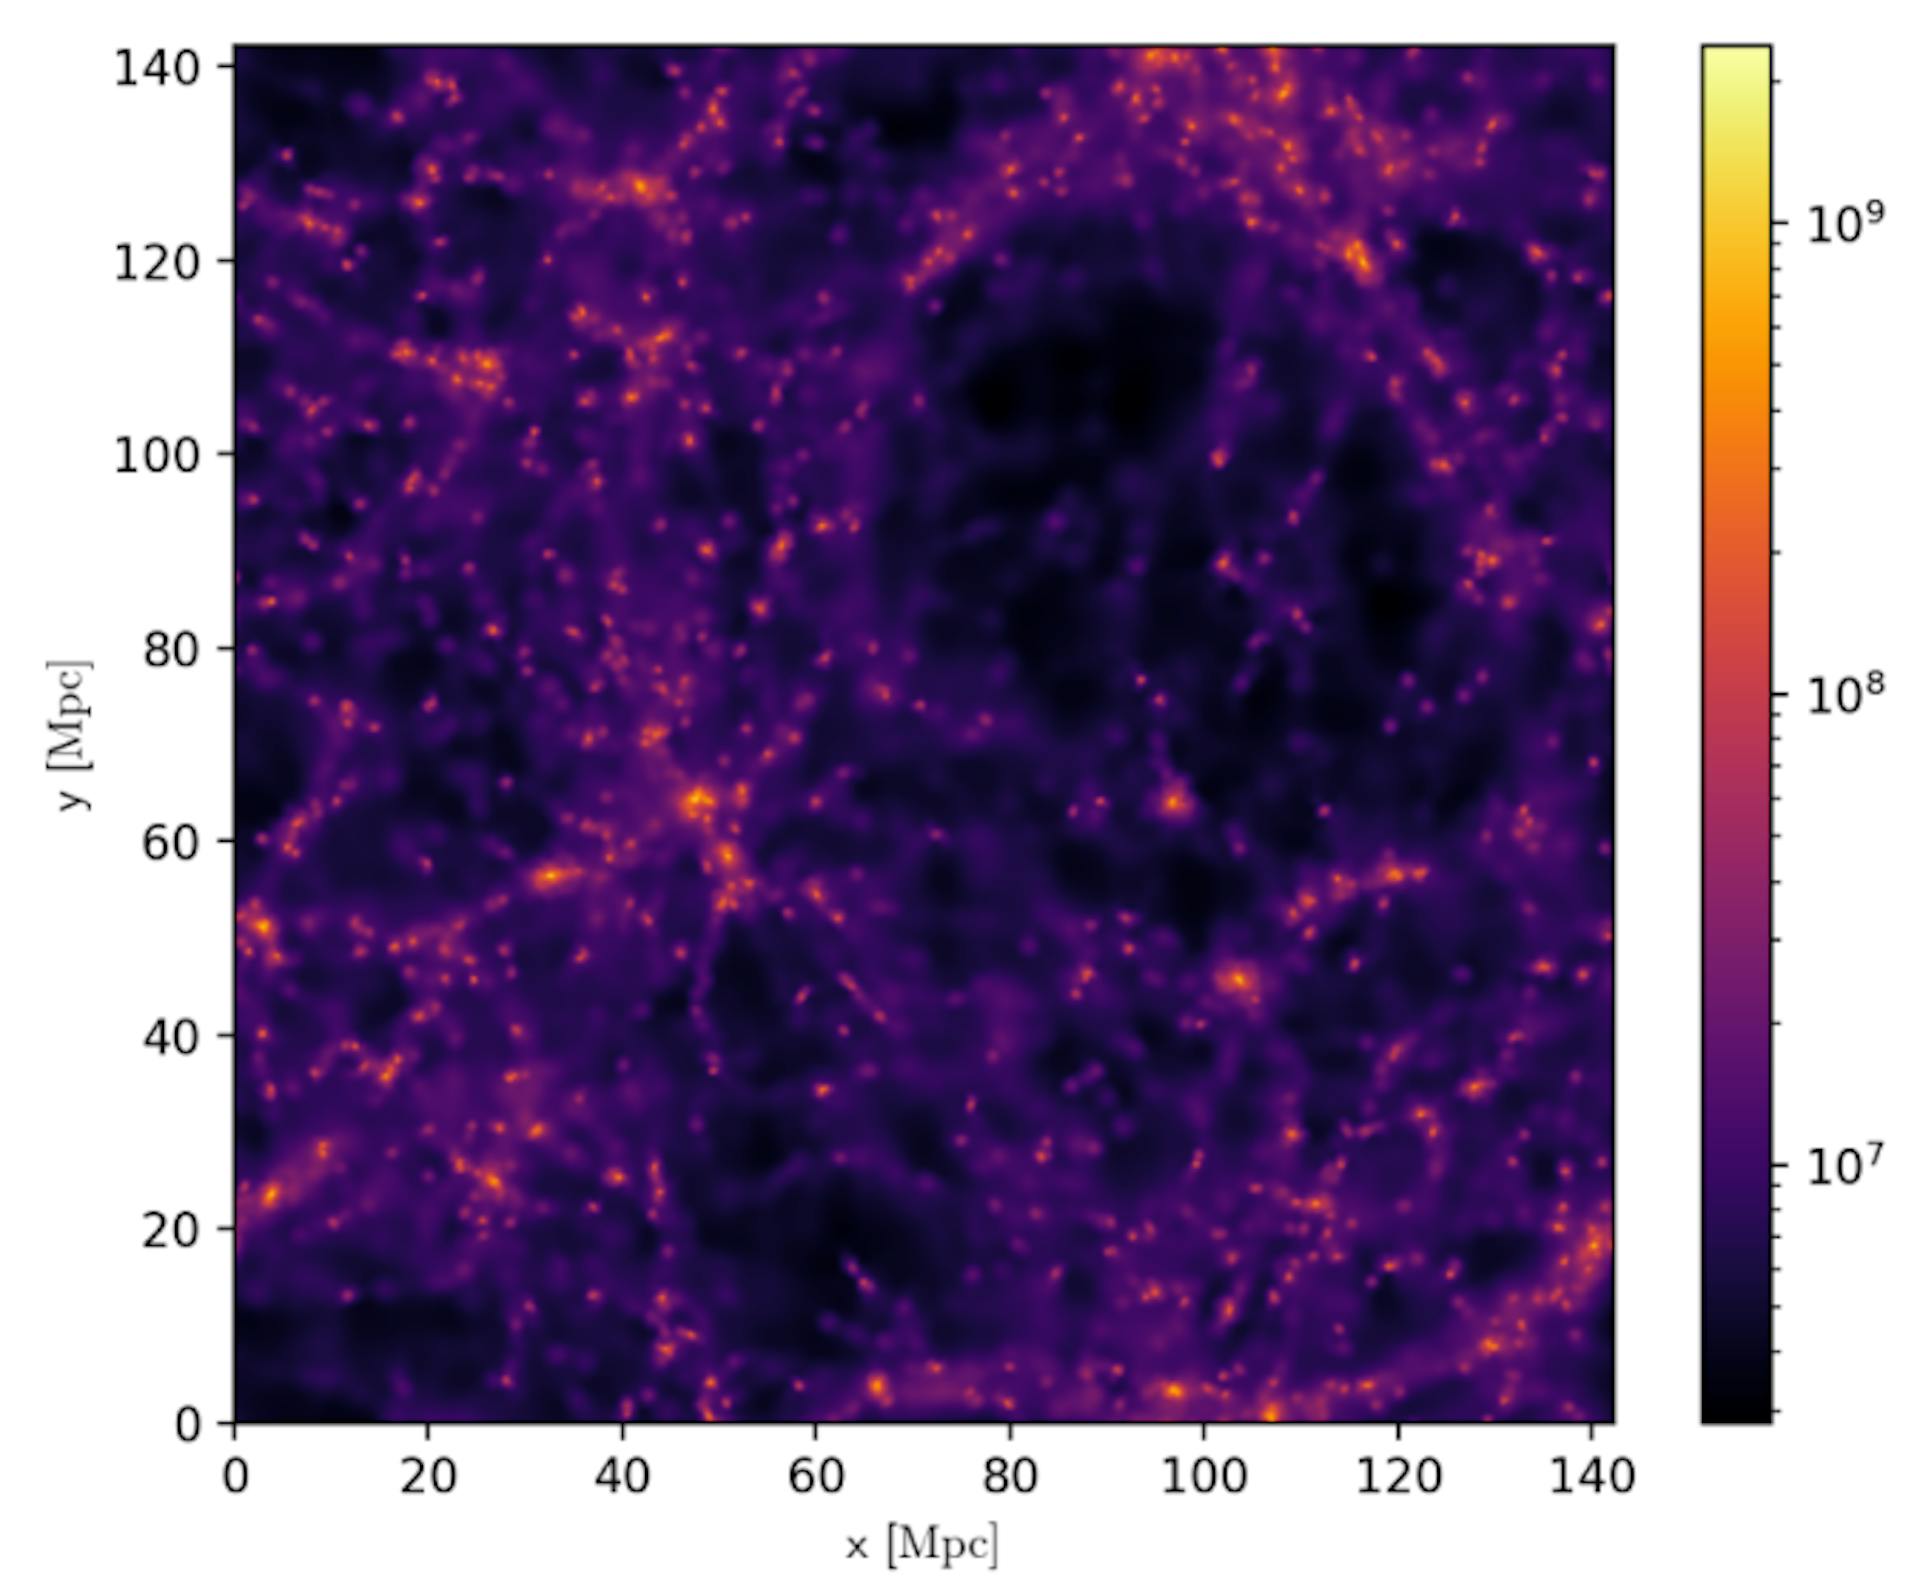 Figure 3. A snapshot at time 13.7Gyr of the projected mass for a small cosmological volume with dark matter simulated using SWIFT. Note that due to local gravity wells some regions will have a higher density of particles than others.